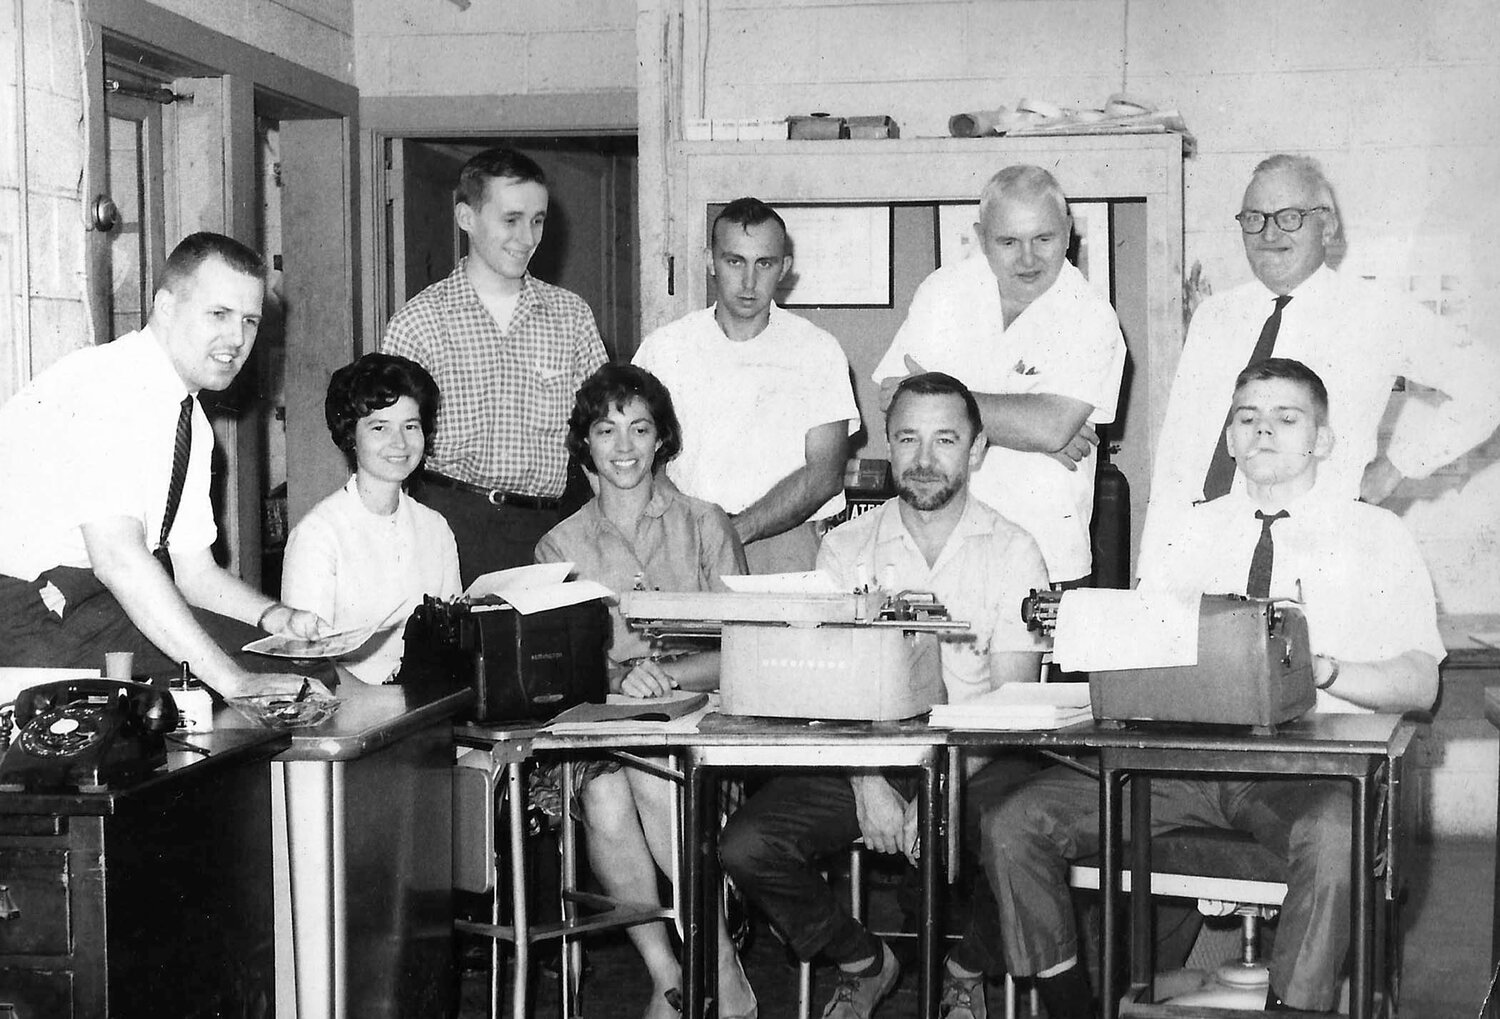 The newsroom staff in 1963 includes, from left, Ron Stevens, Ginny Ryan, Jan Vollmer, Jim Miller, Joe Smyth, and in the back row, Steve Callaghan, Larry Abernathy, Jack Smyth and Paul McConomy. The group is shown in the newsroom of the old cinderblock building that housed the Delaware State News on North Street in Dover.